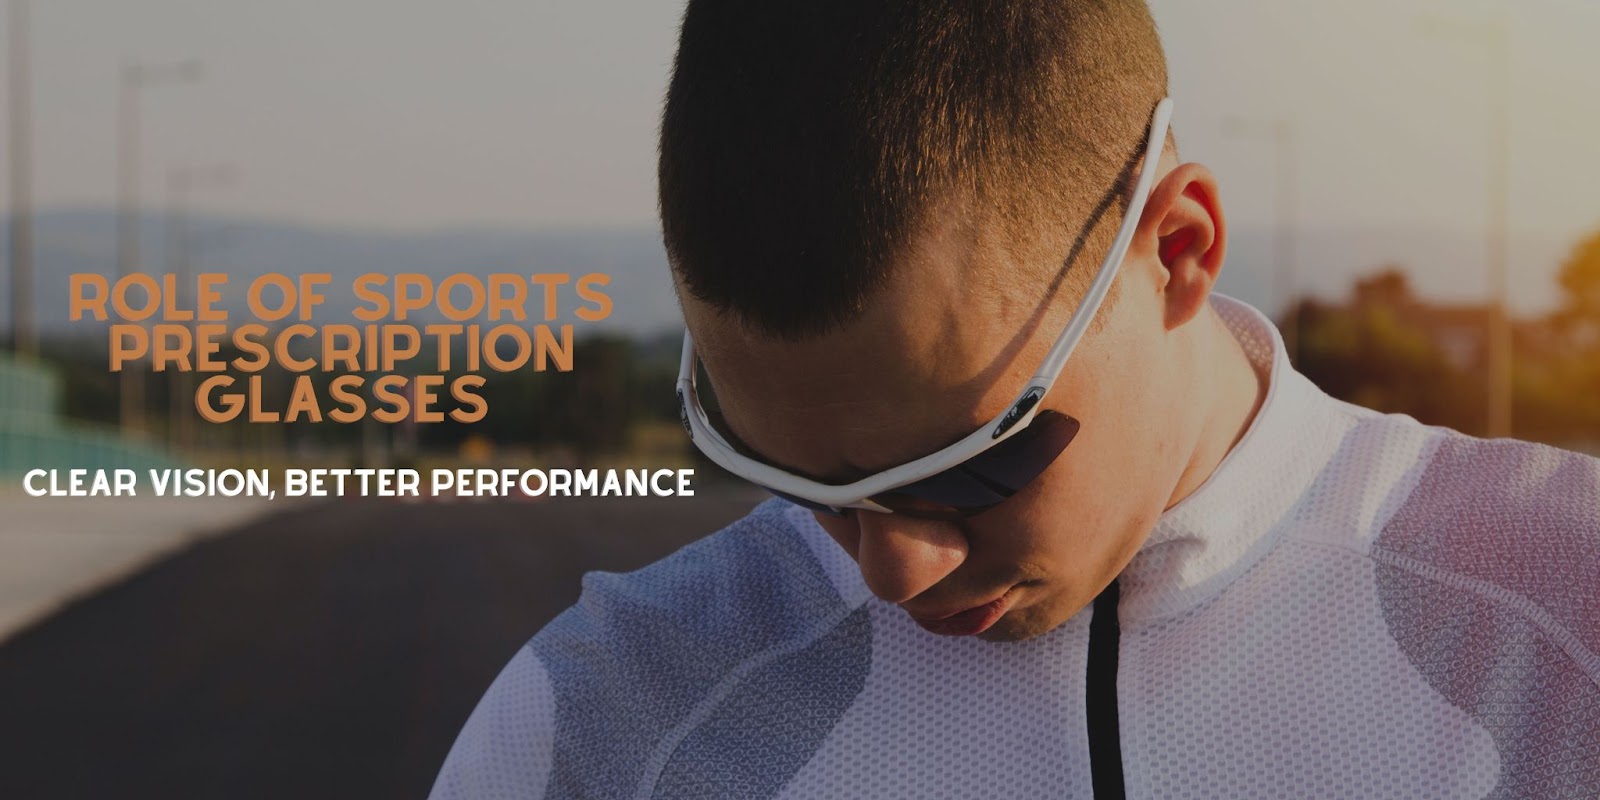 Clear Vision, Better Performance: The Role of Sports Prescription Glasses